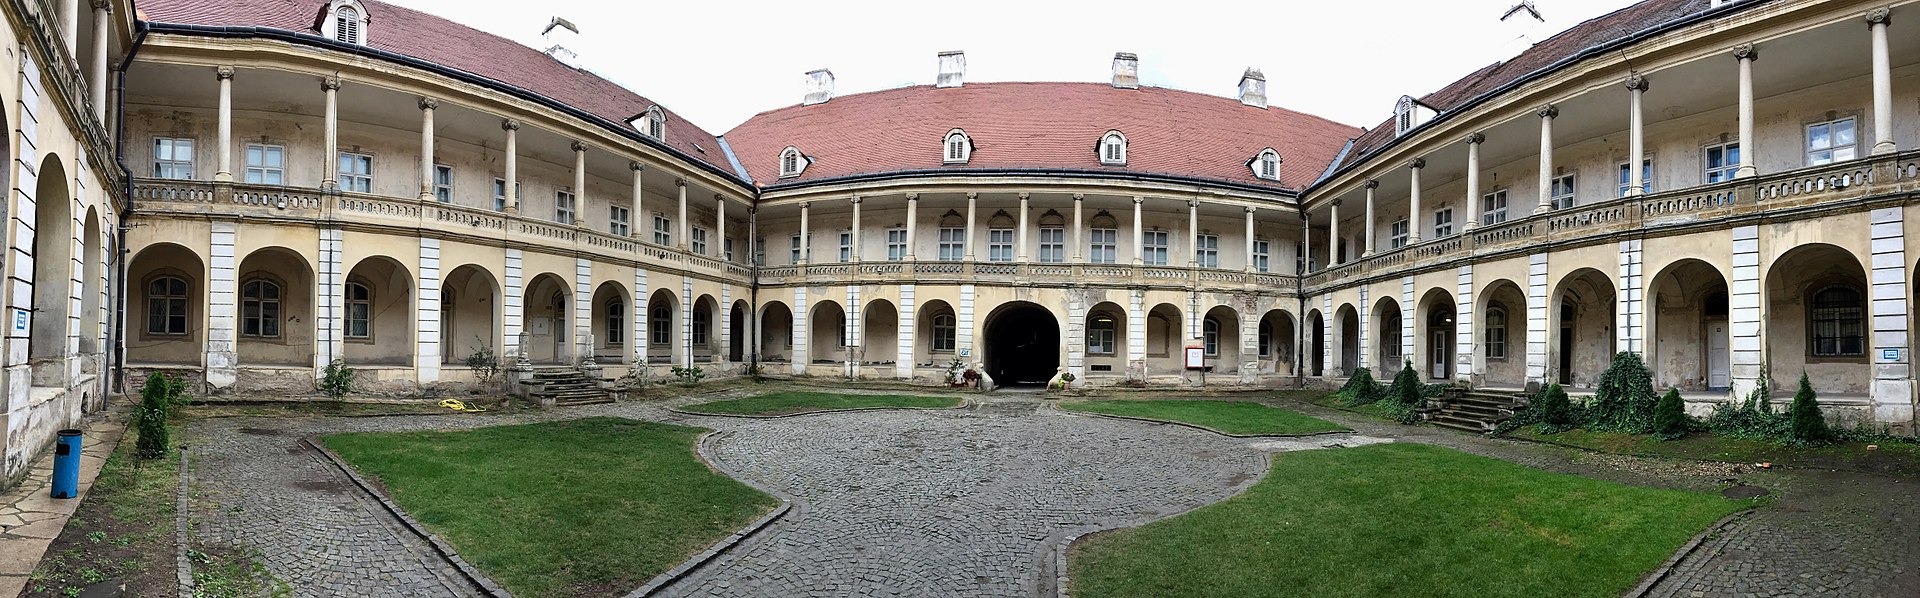 Changing Spaces - Courtyard of the Banffy Palace Art Museum of Cluj